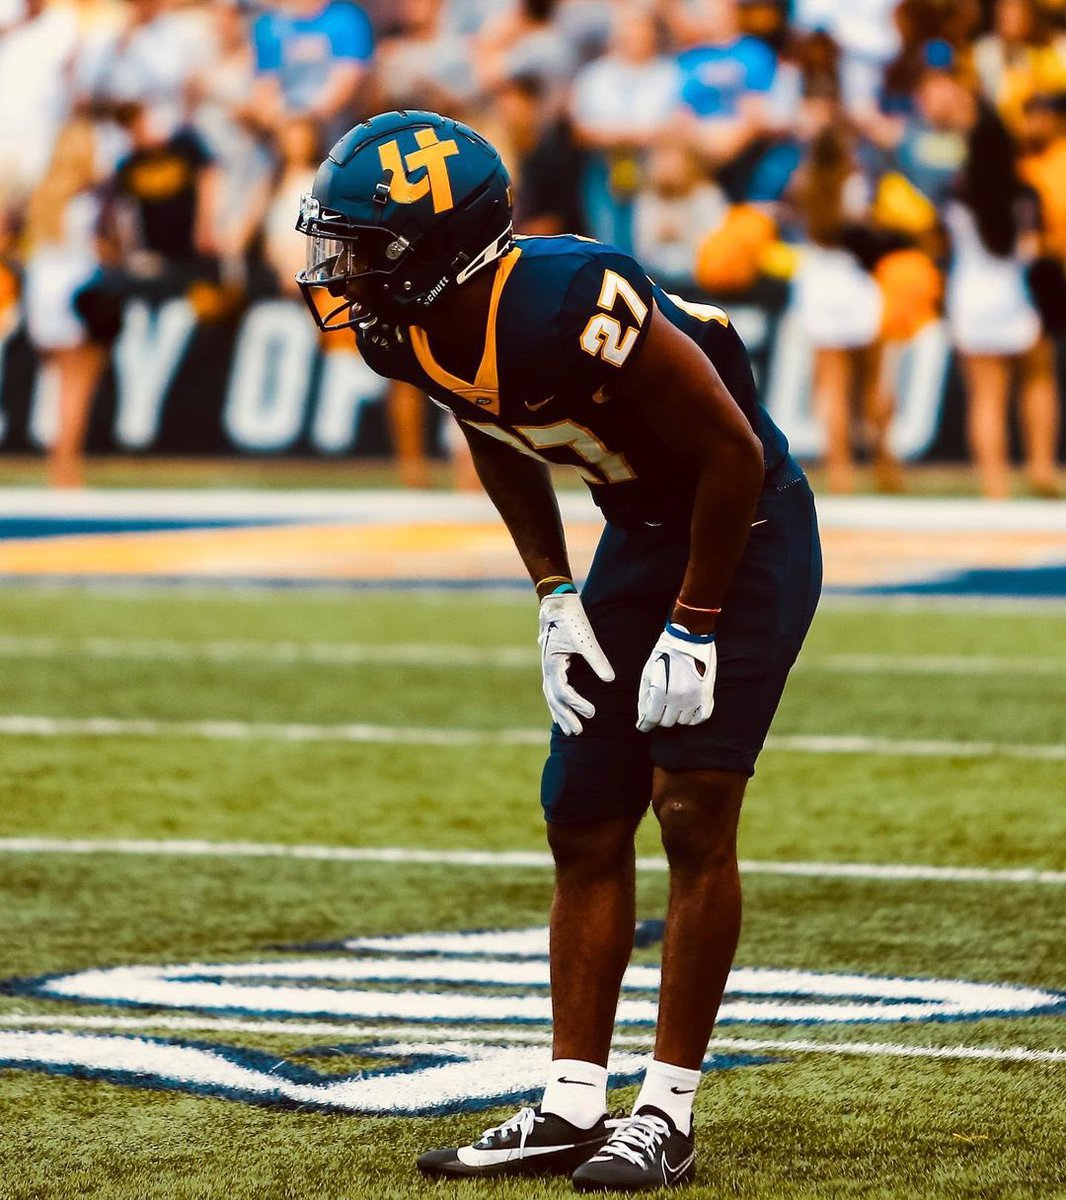 Wow ! I’m extremely blessed to receive my first offer from the University of Toledo 🚀 ! @Andrew_Ivins @Perroni247 @adamgorney @ChadSimmons_ @MohrRecruiting @JeremyO_Johnson @RivalsFriedman @JohnGarcia_Jr @ToledoFB @GoTolRockets @CoachTyBrooks @ccrusadersfball @kerrymcdowell